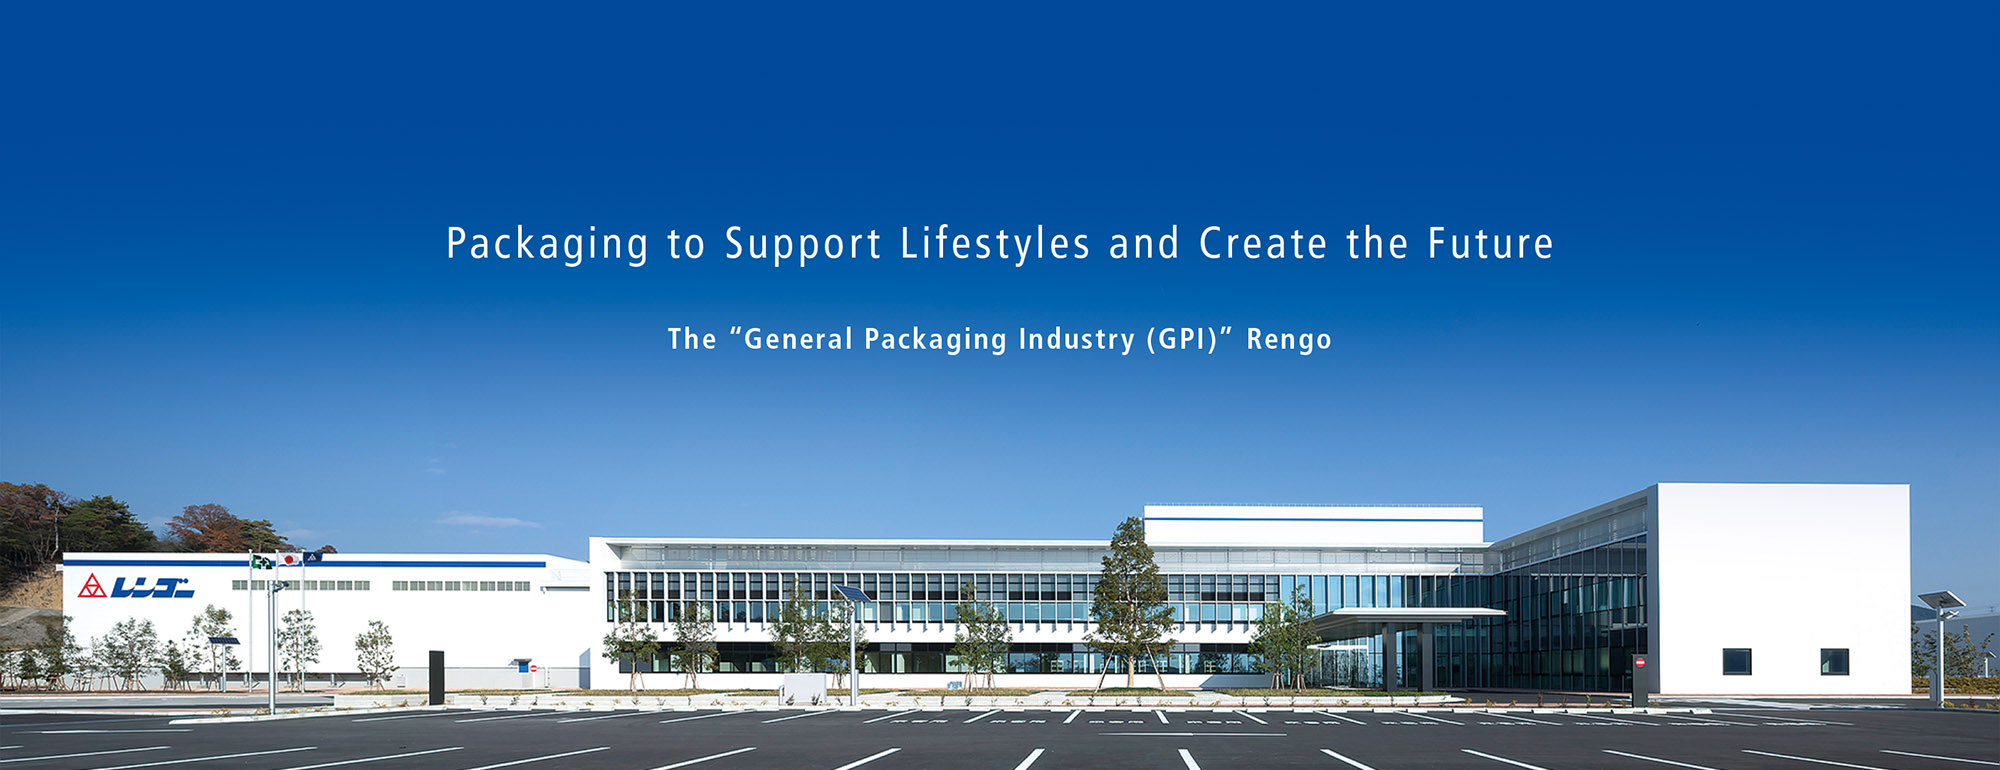 Supporting Lifestyles and Creating the Future through Packaging